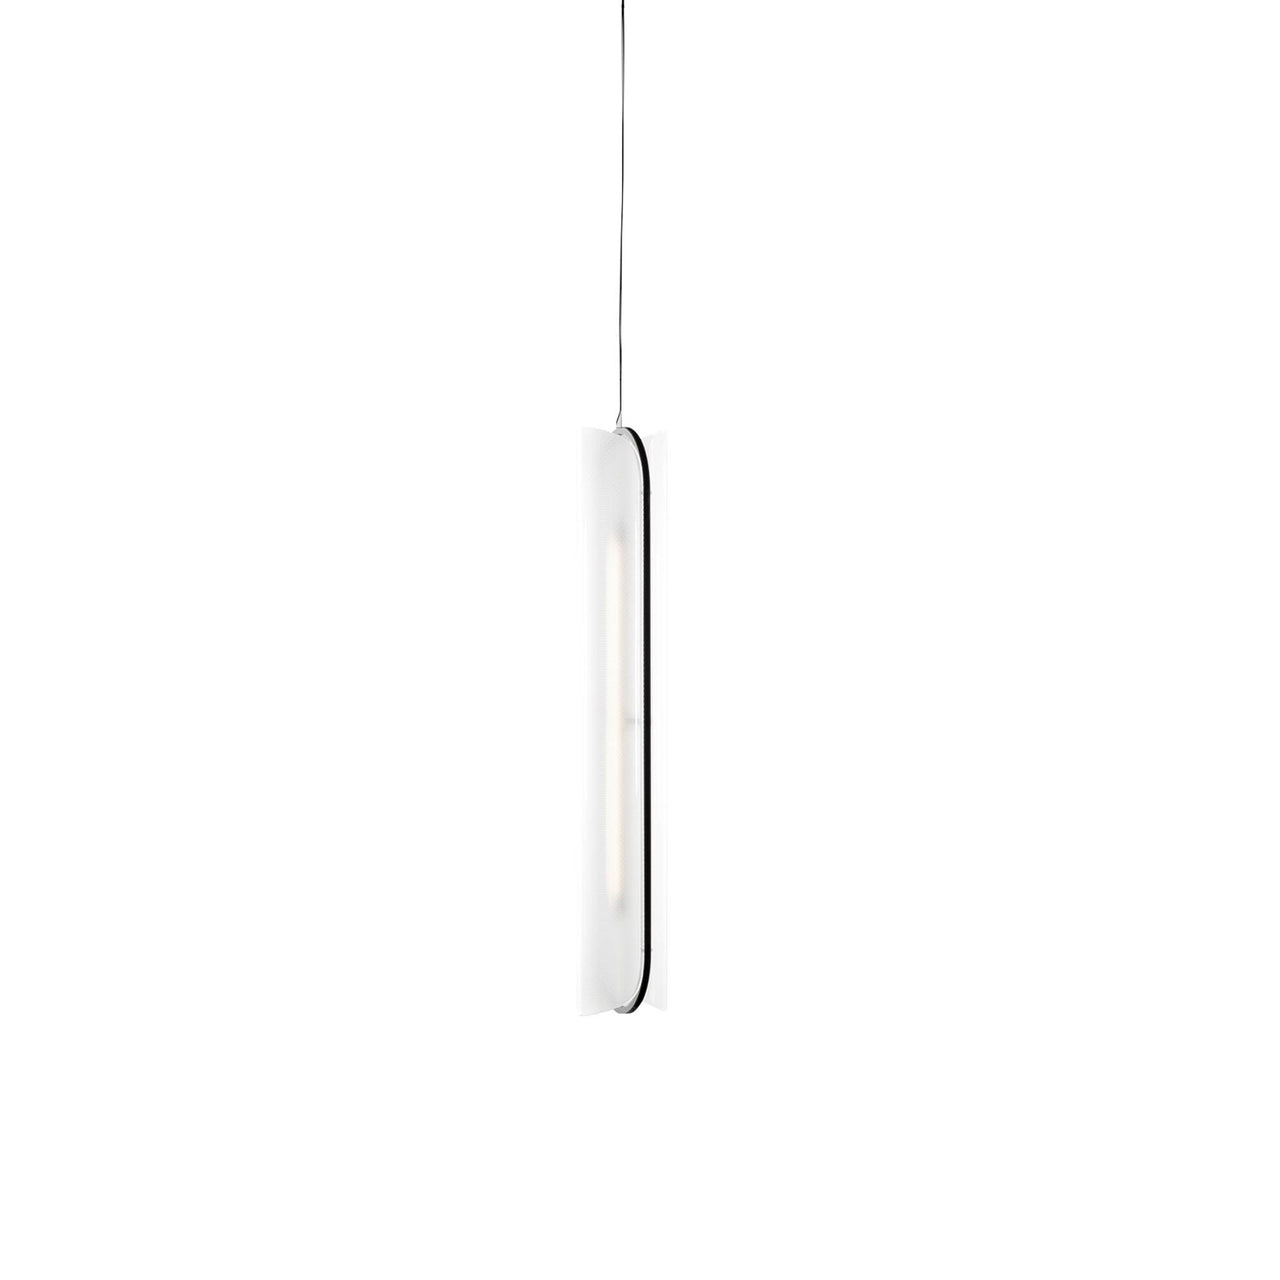 Vale System Pendant Light: Vertical + End-to-End + Anthracite + Vale 1